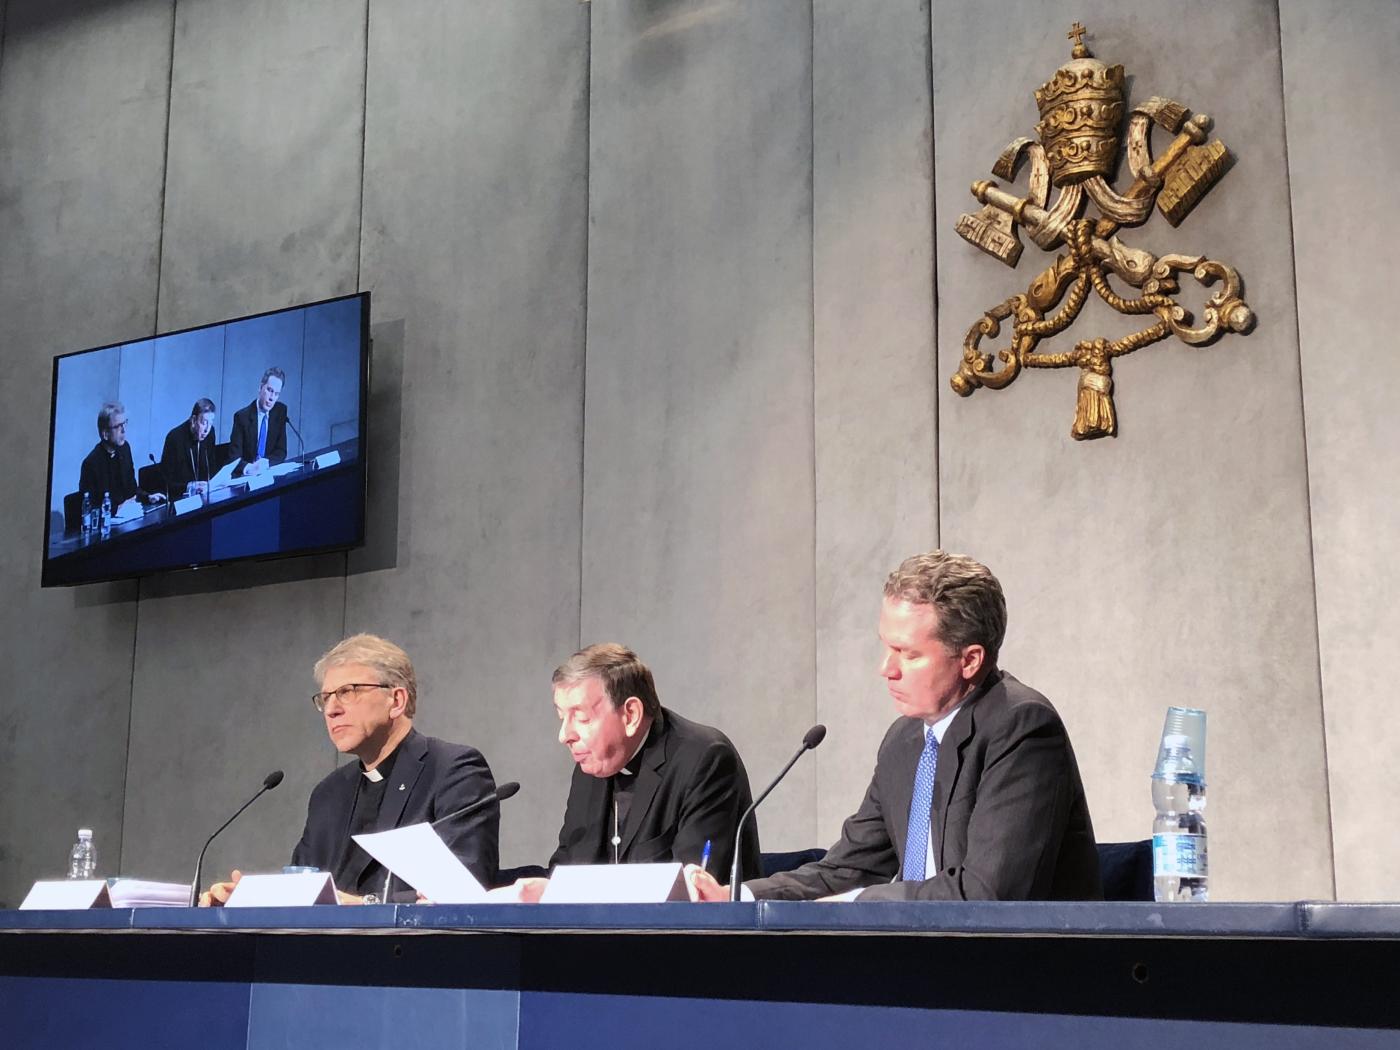 Rev. Dr Olav Fykse Tveit, Cardinal Kurt Koch and Mr Greg Burke, director of the Holy See Press Office during the press conference. Photo: Marianne Ejdersten/WCC